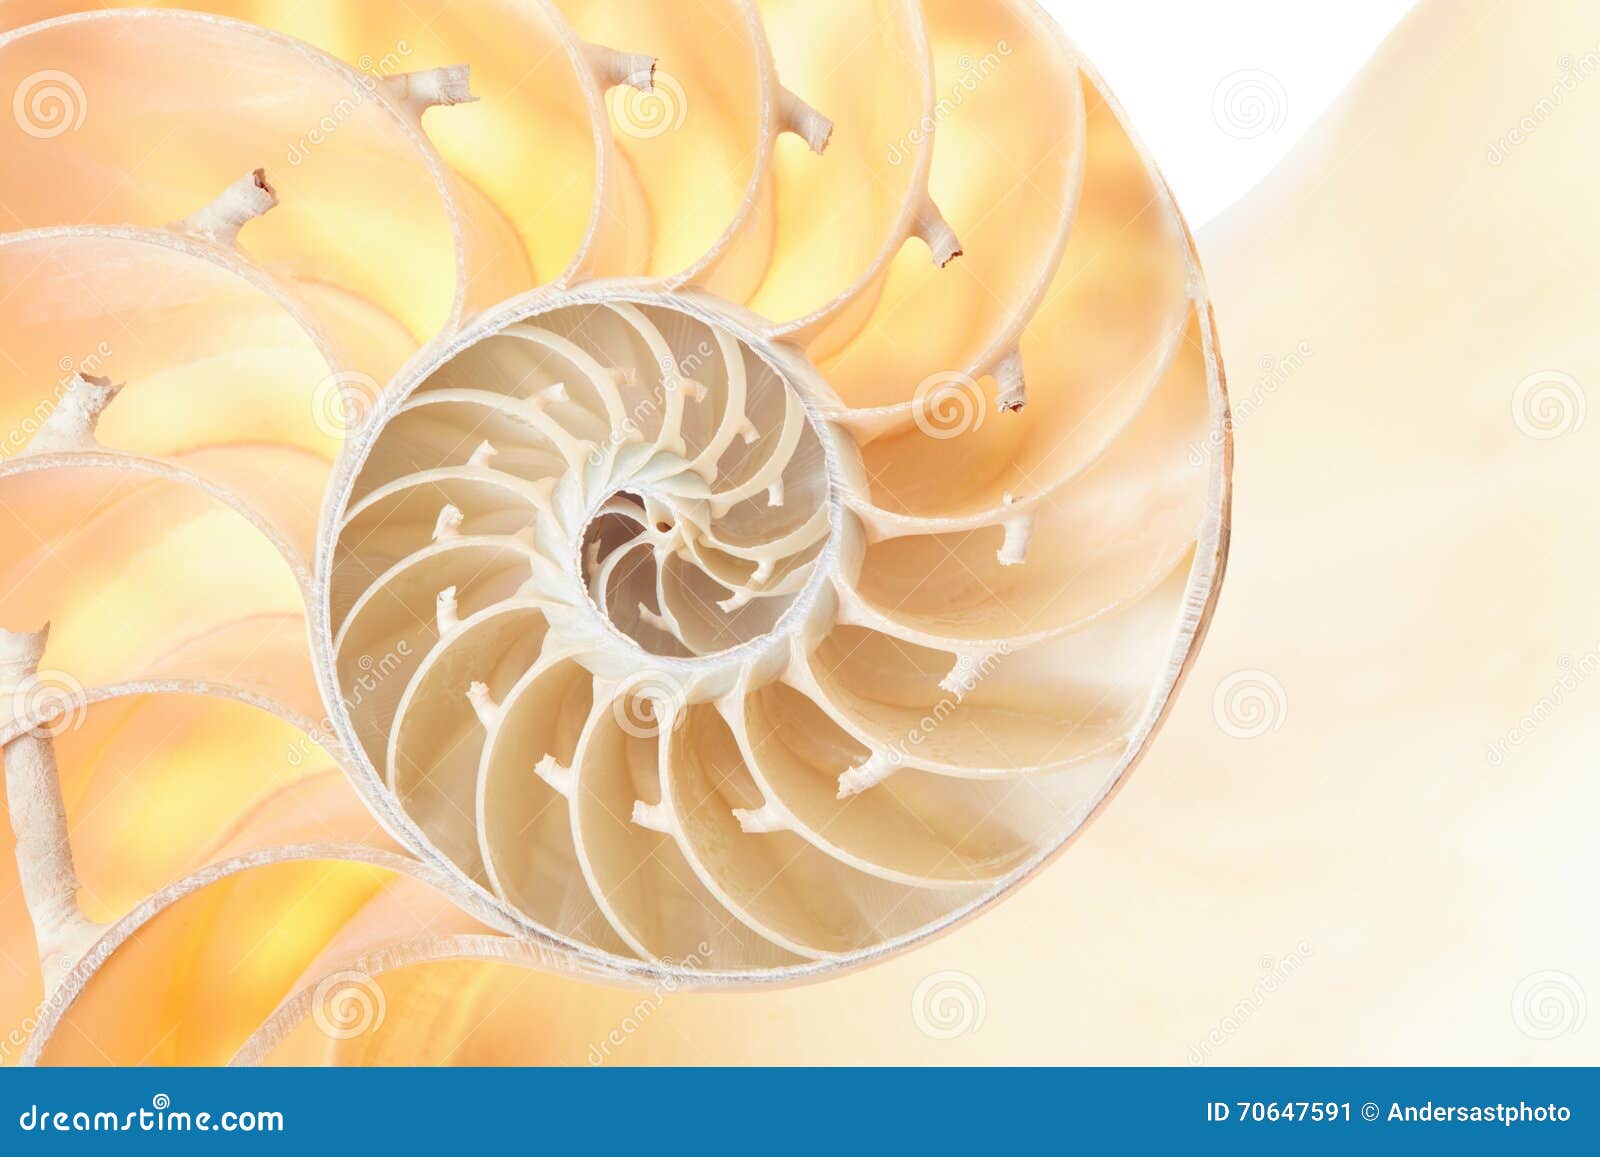 nautilus shell section detail background